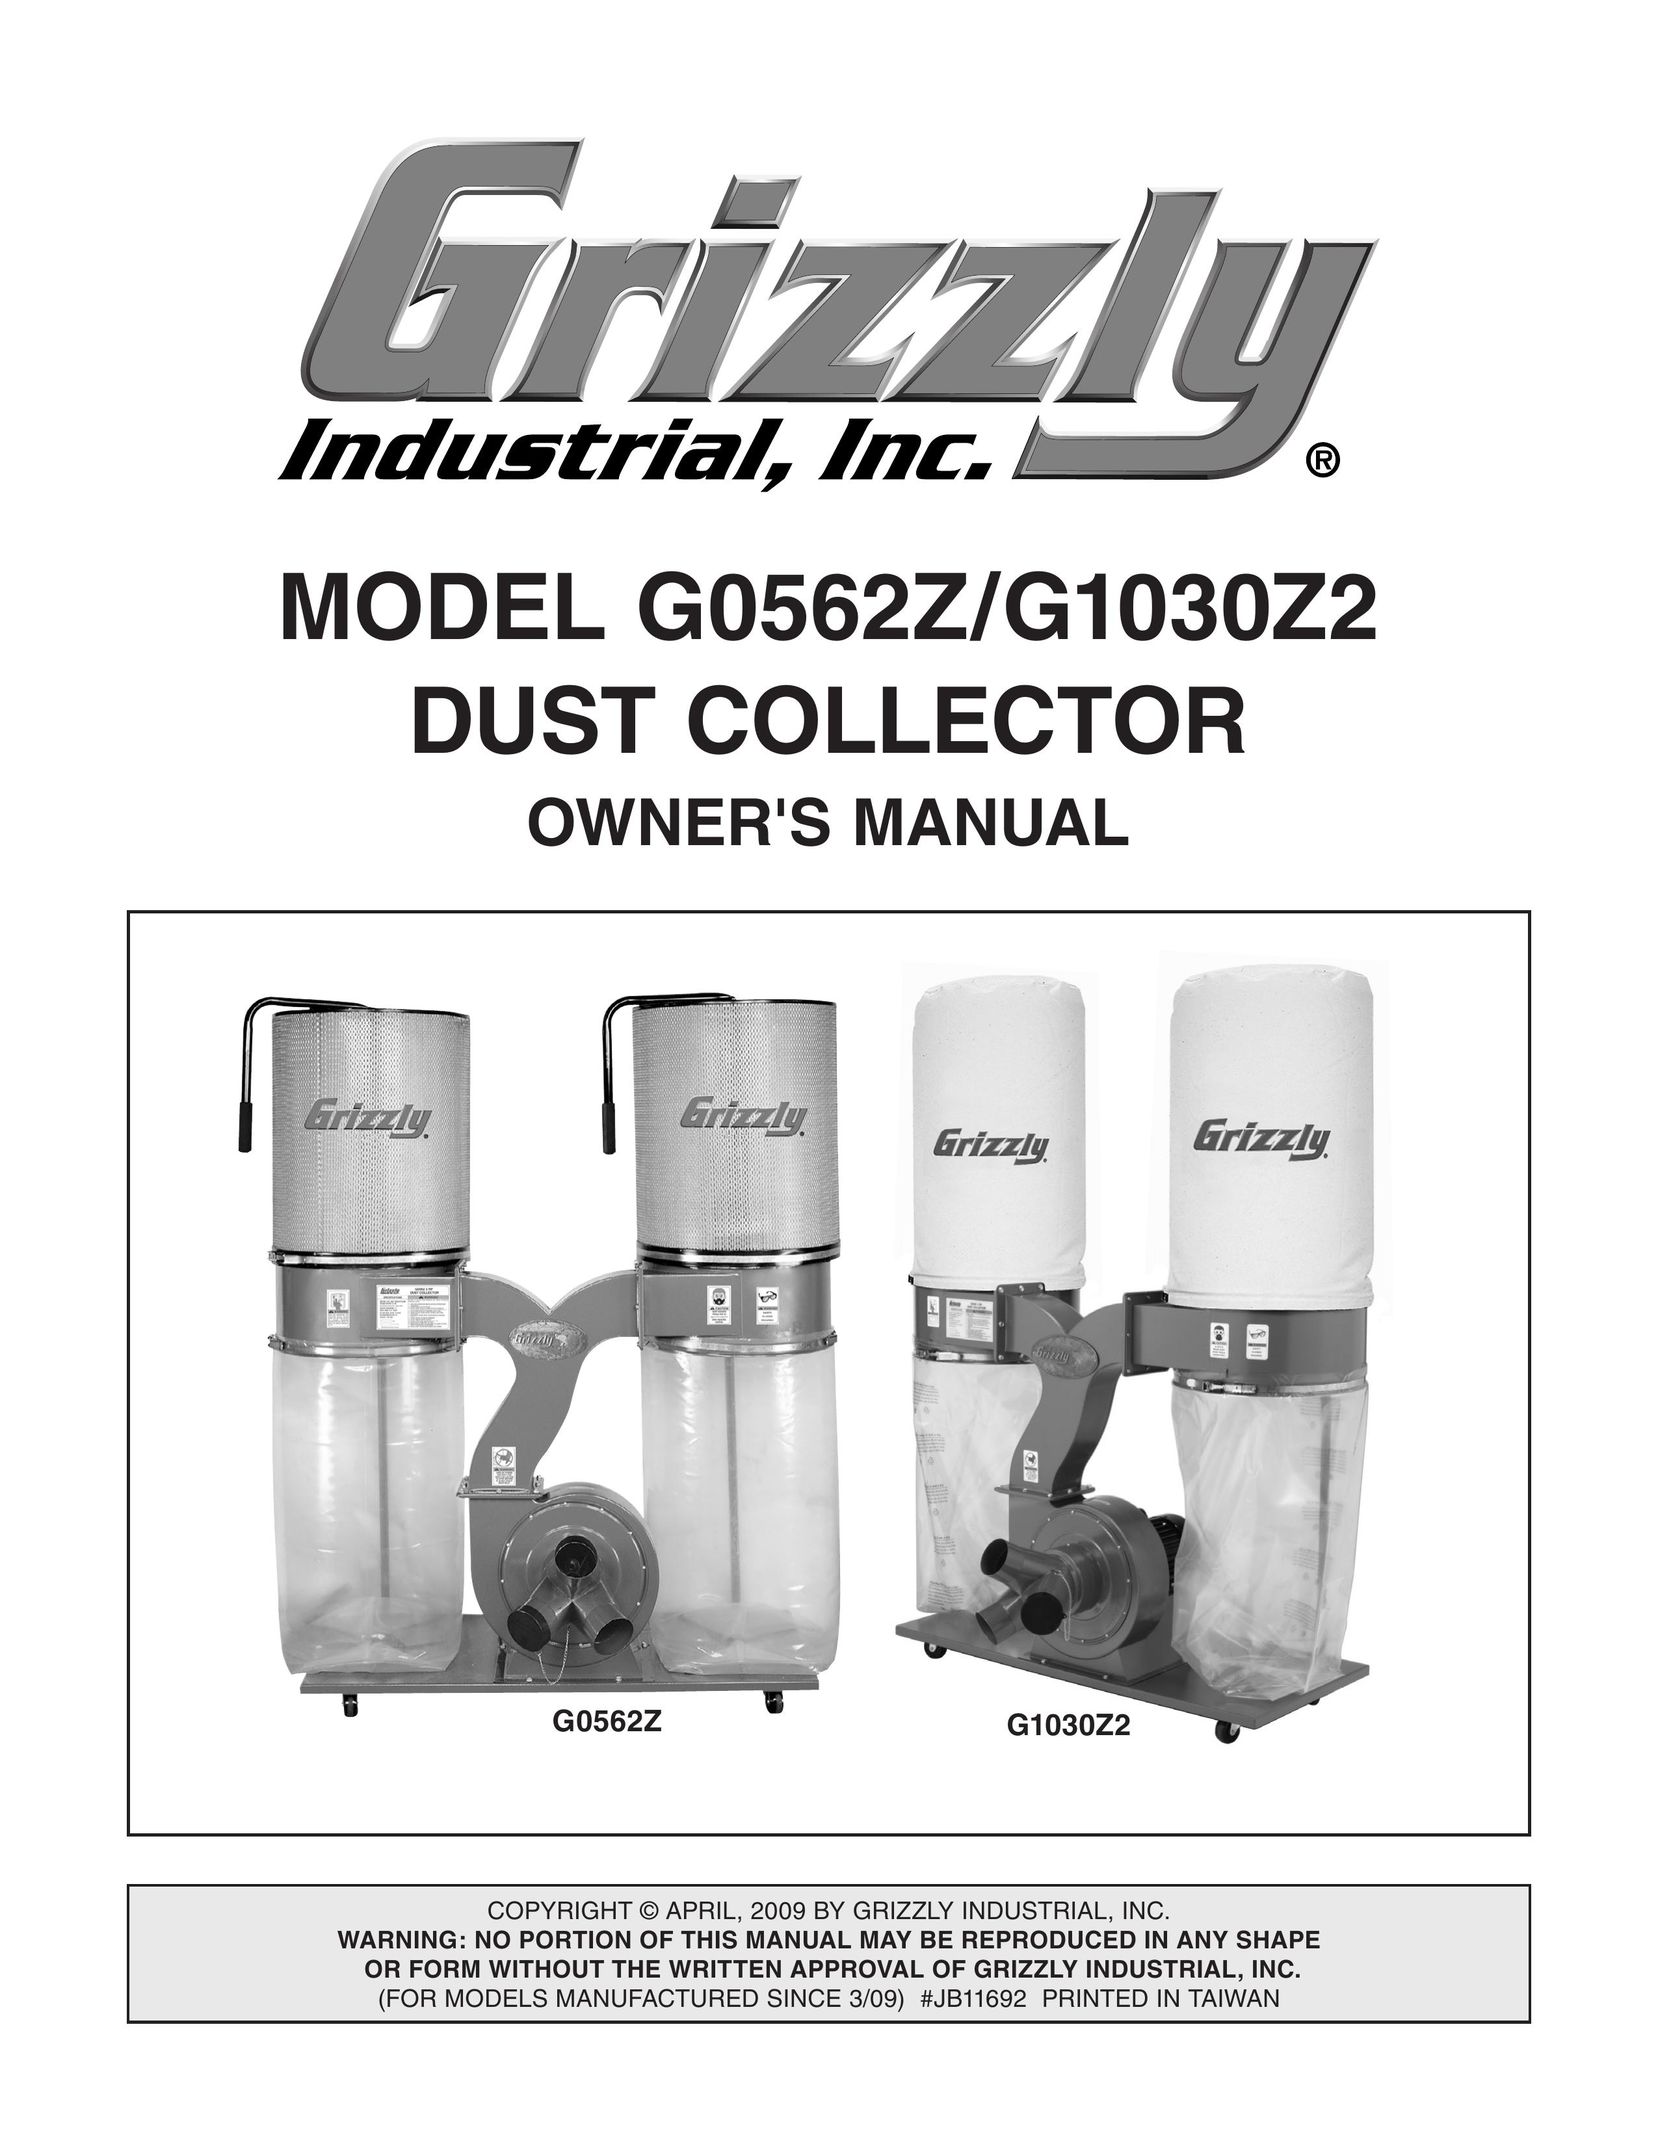 Grizzly G1030Z2 Car Video System User Manual